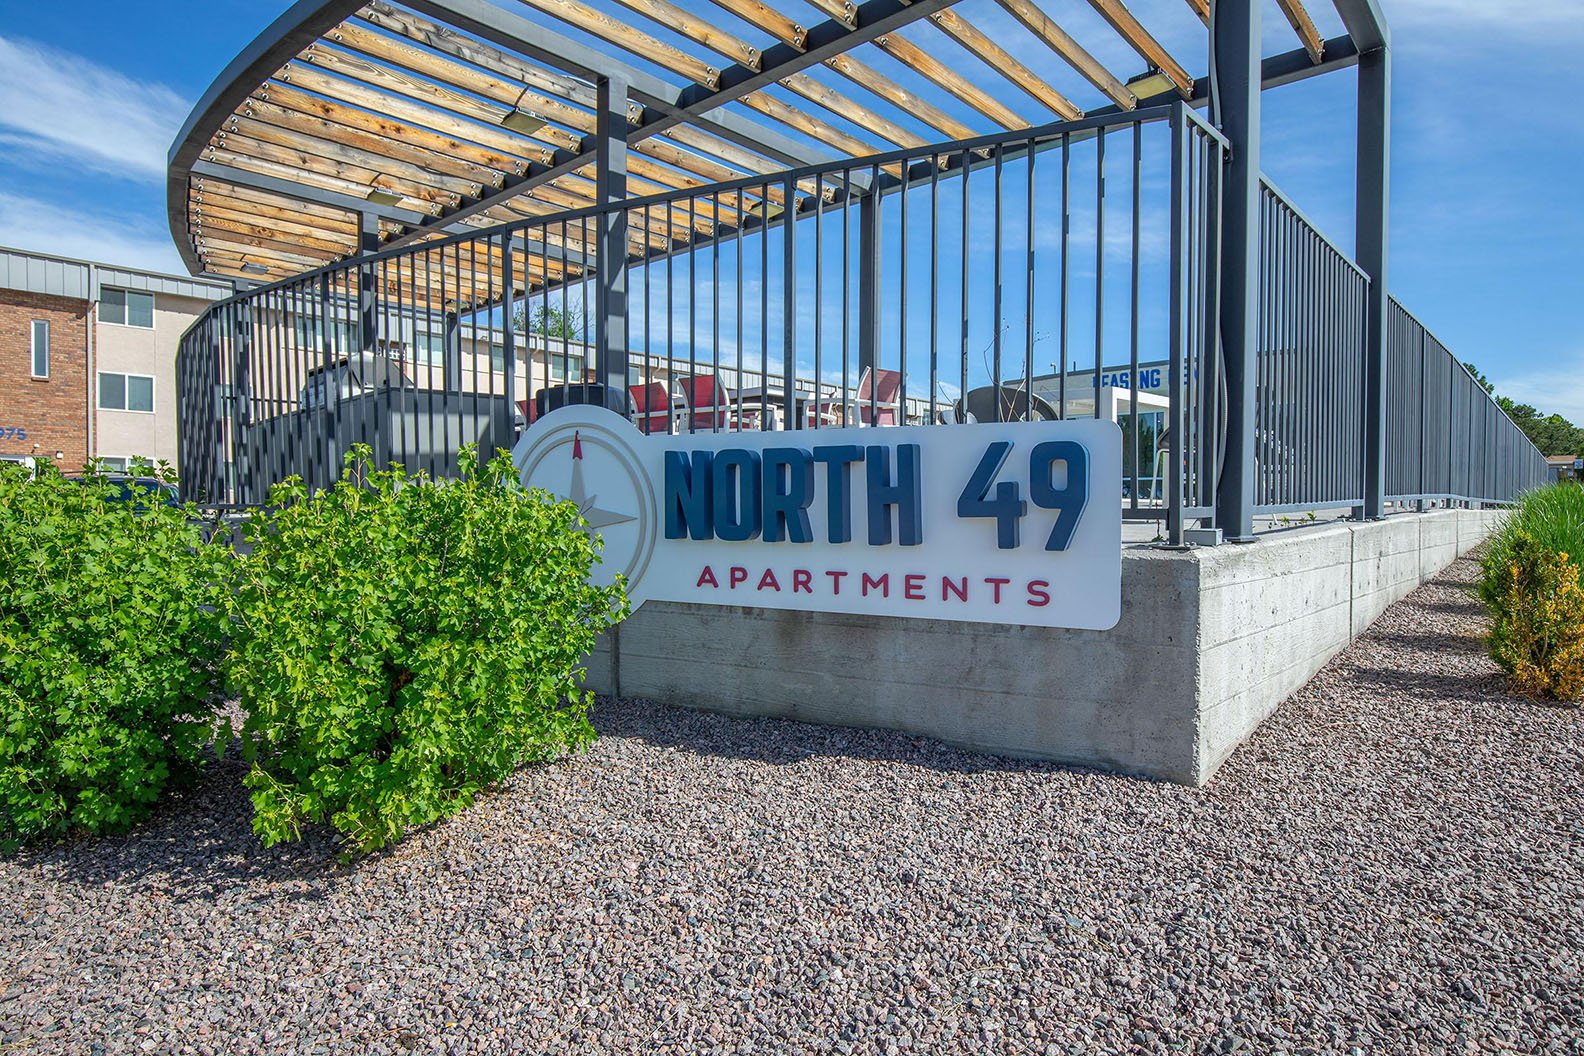 Signage for North 49 Apartments, located in Colorado Springs, CO